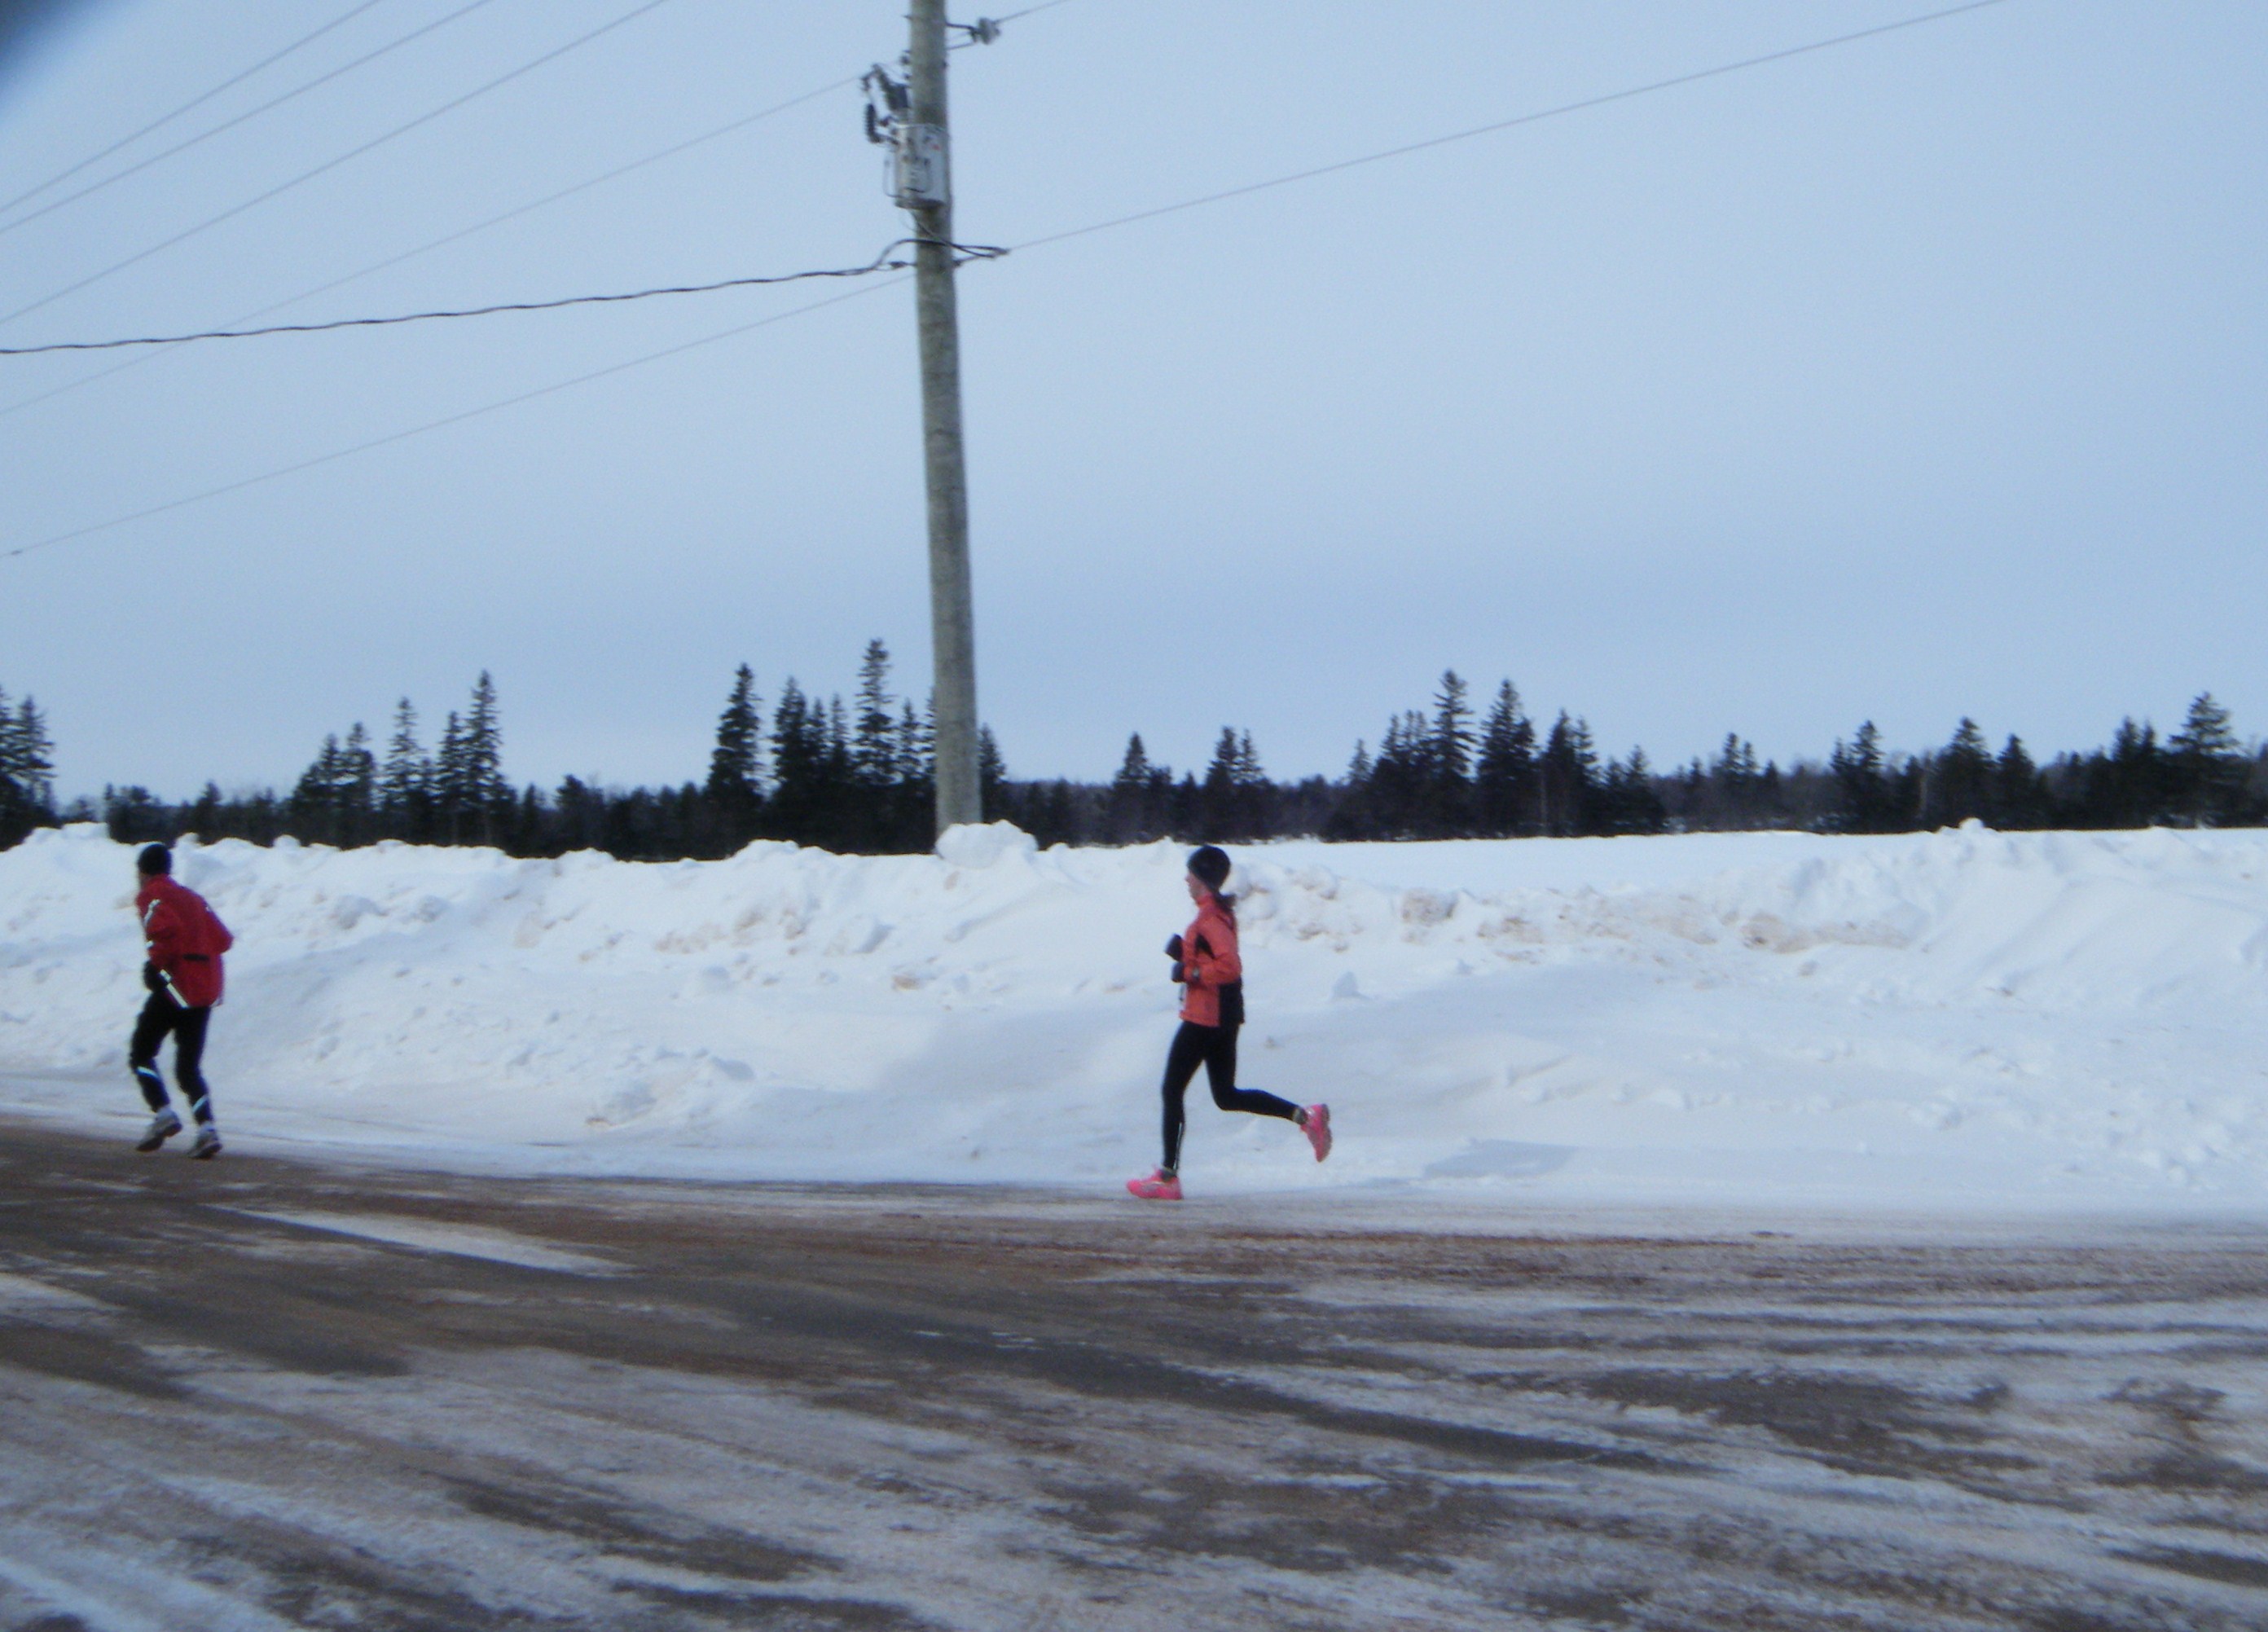 Winter Half marathon runners surrounded by snowbanks